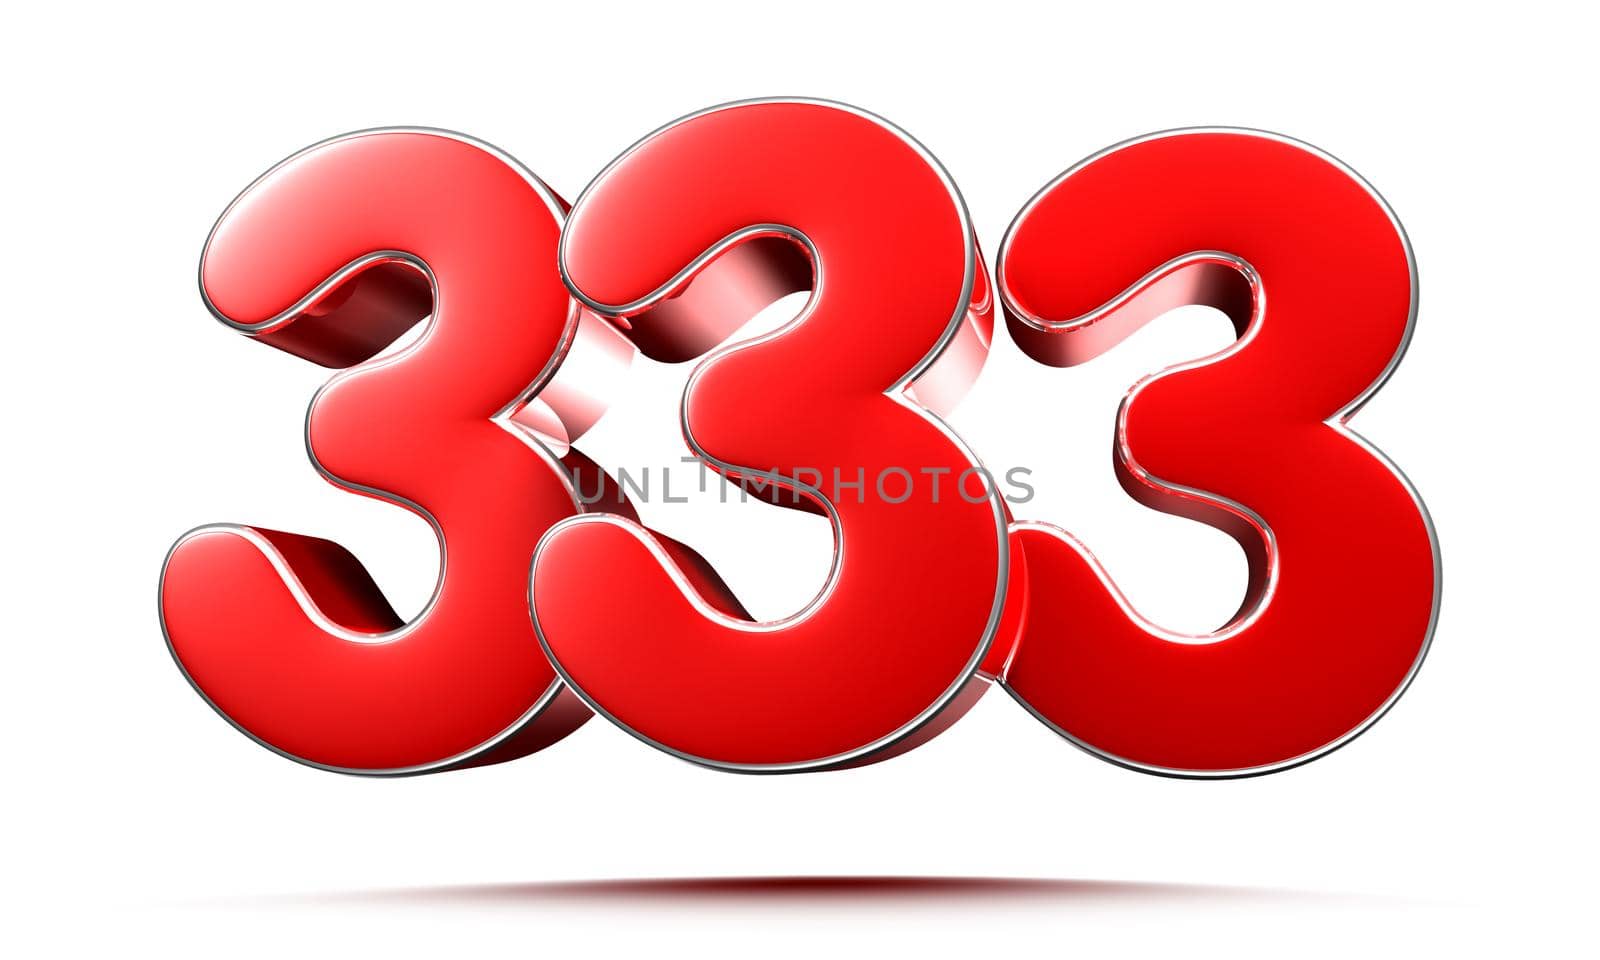 Rounded red numbers 333 on white background 3D illustration with clipping path by thitimontoyai